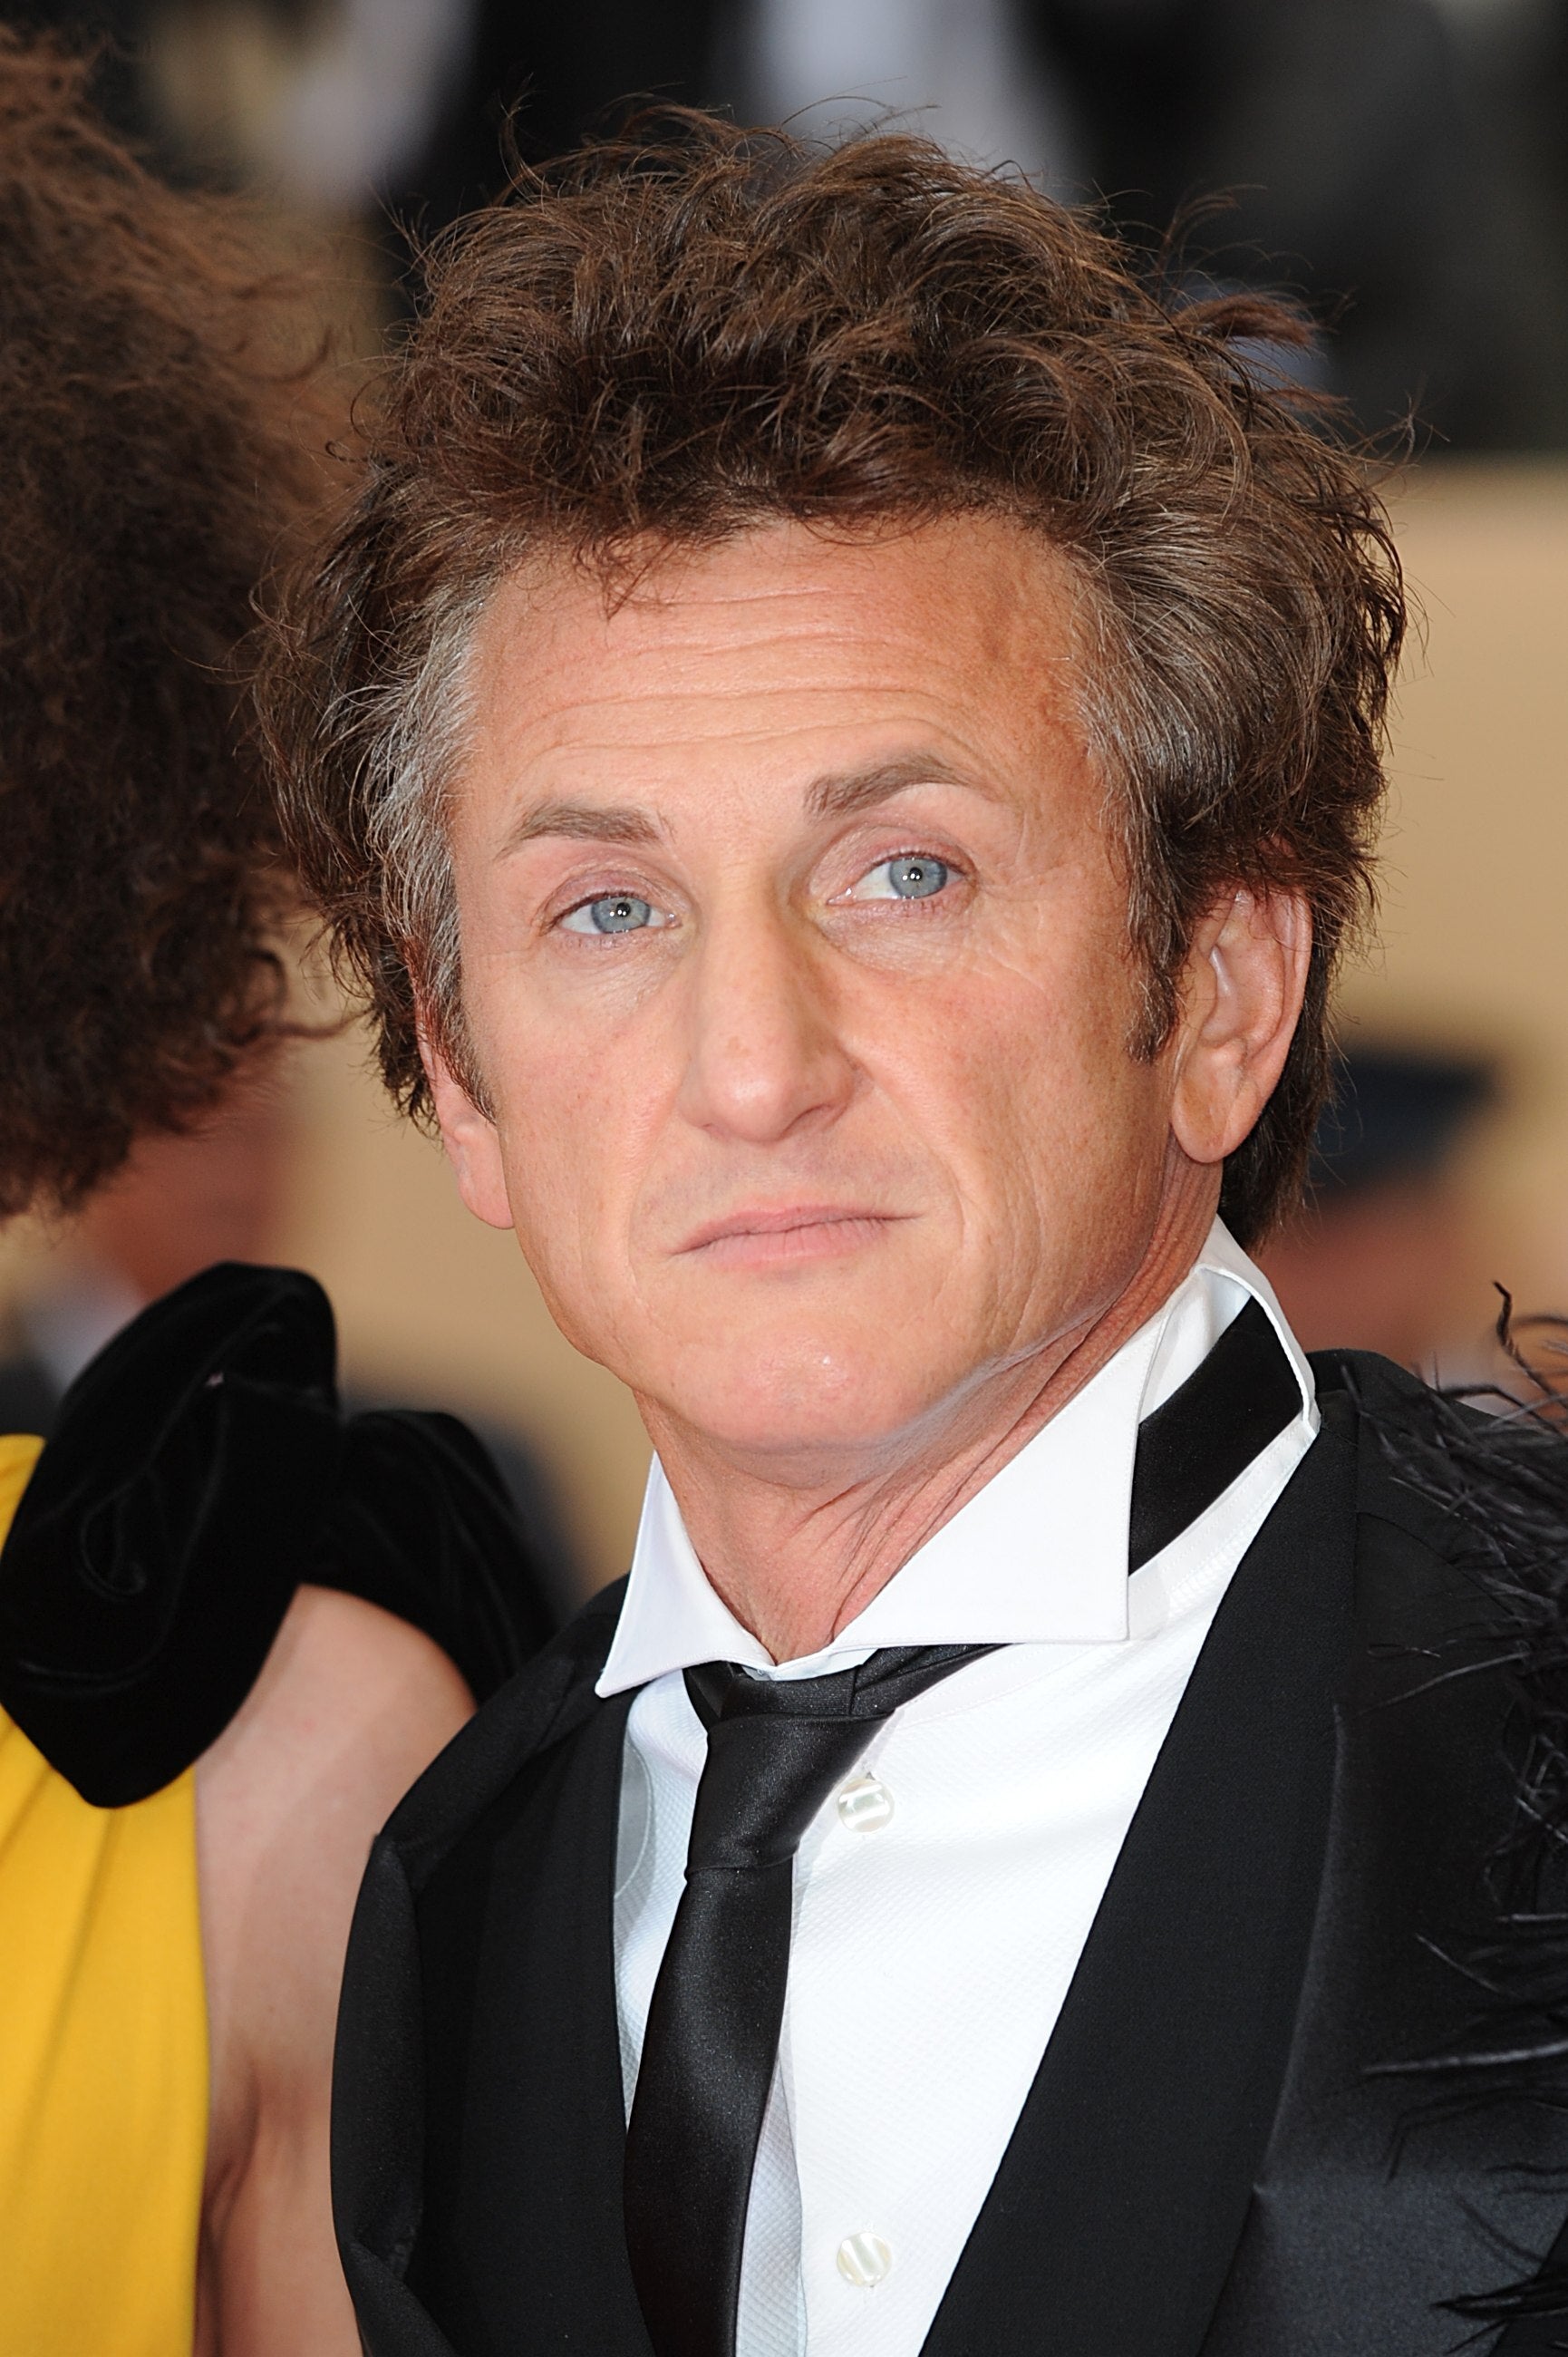 Sean Penn says Ukraine “will win” the ongoing war with Russia but that the cost of victory remains unclear (Joel Ryan/PA)